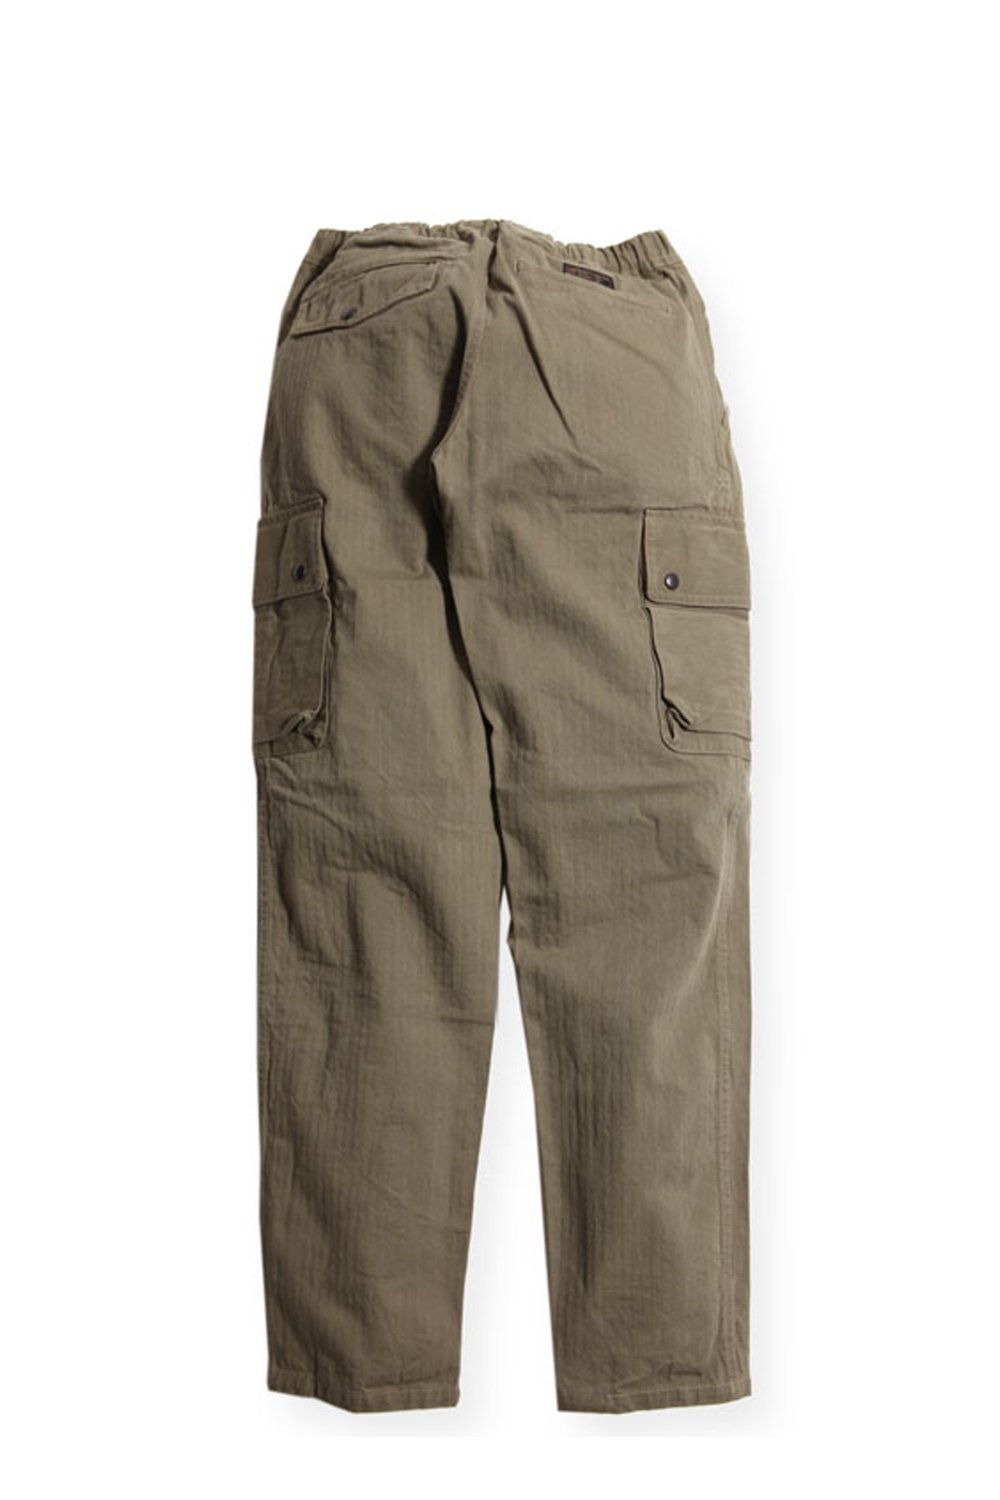 WESTRIDE(ウエストライド) カーゴパンツ CYCLE MOUNTAIN CARGO PANTS MB2013-1 通販正規取扱 |  ハーレムストア公式通販サイト